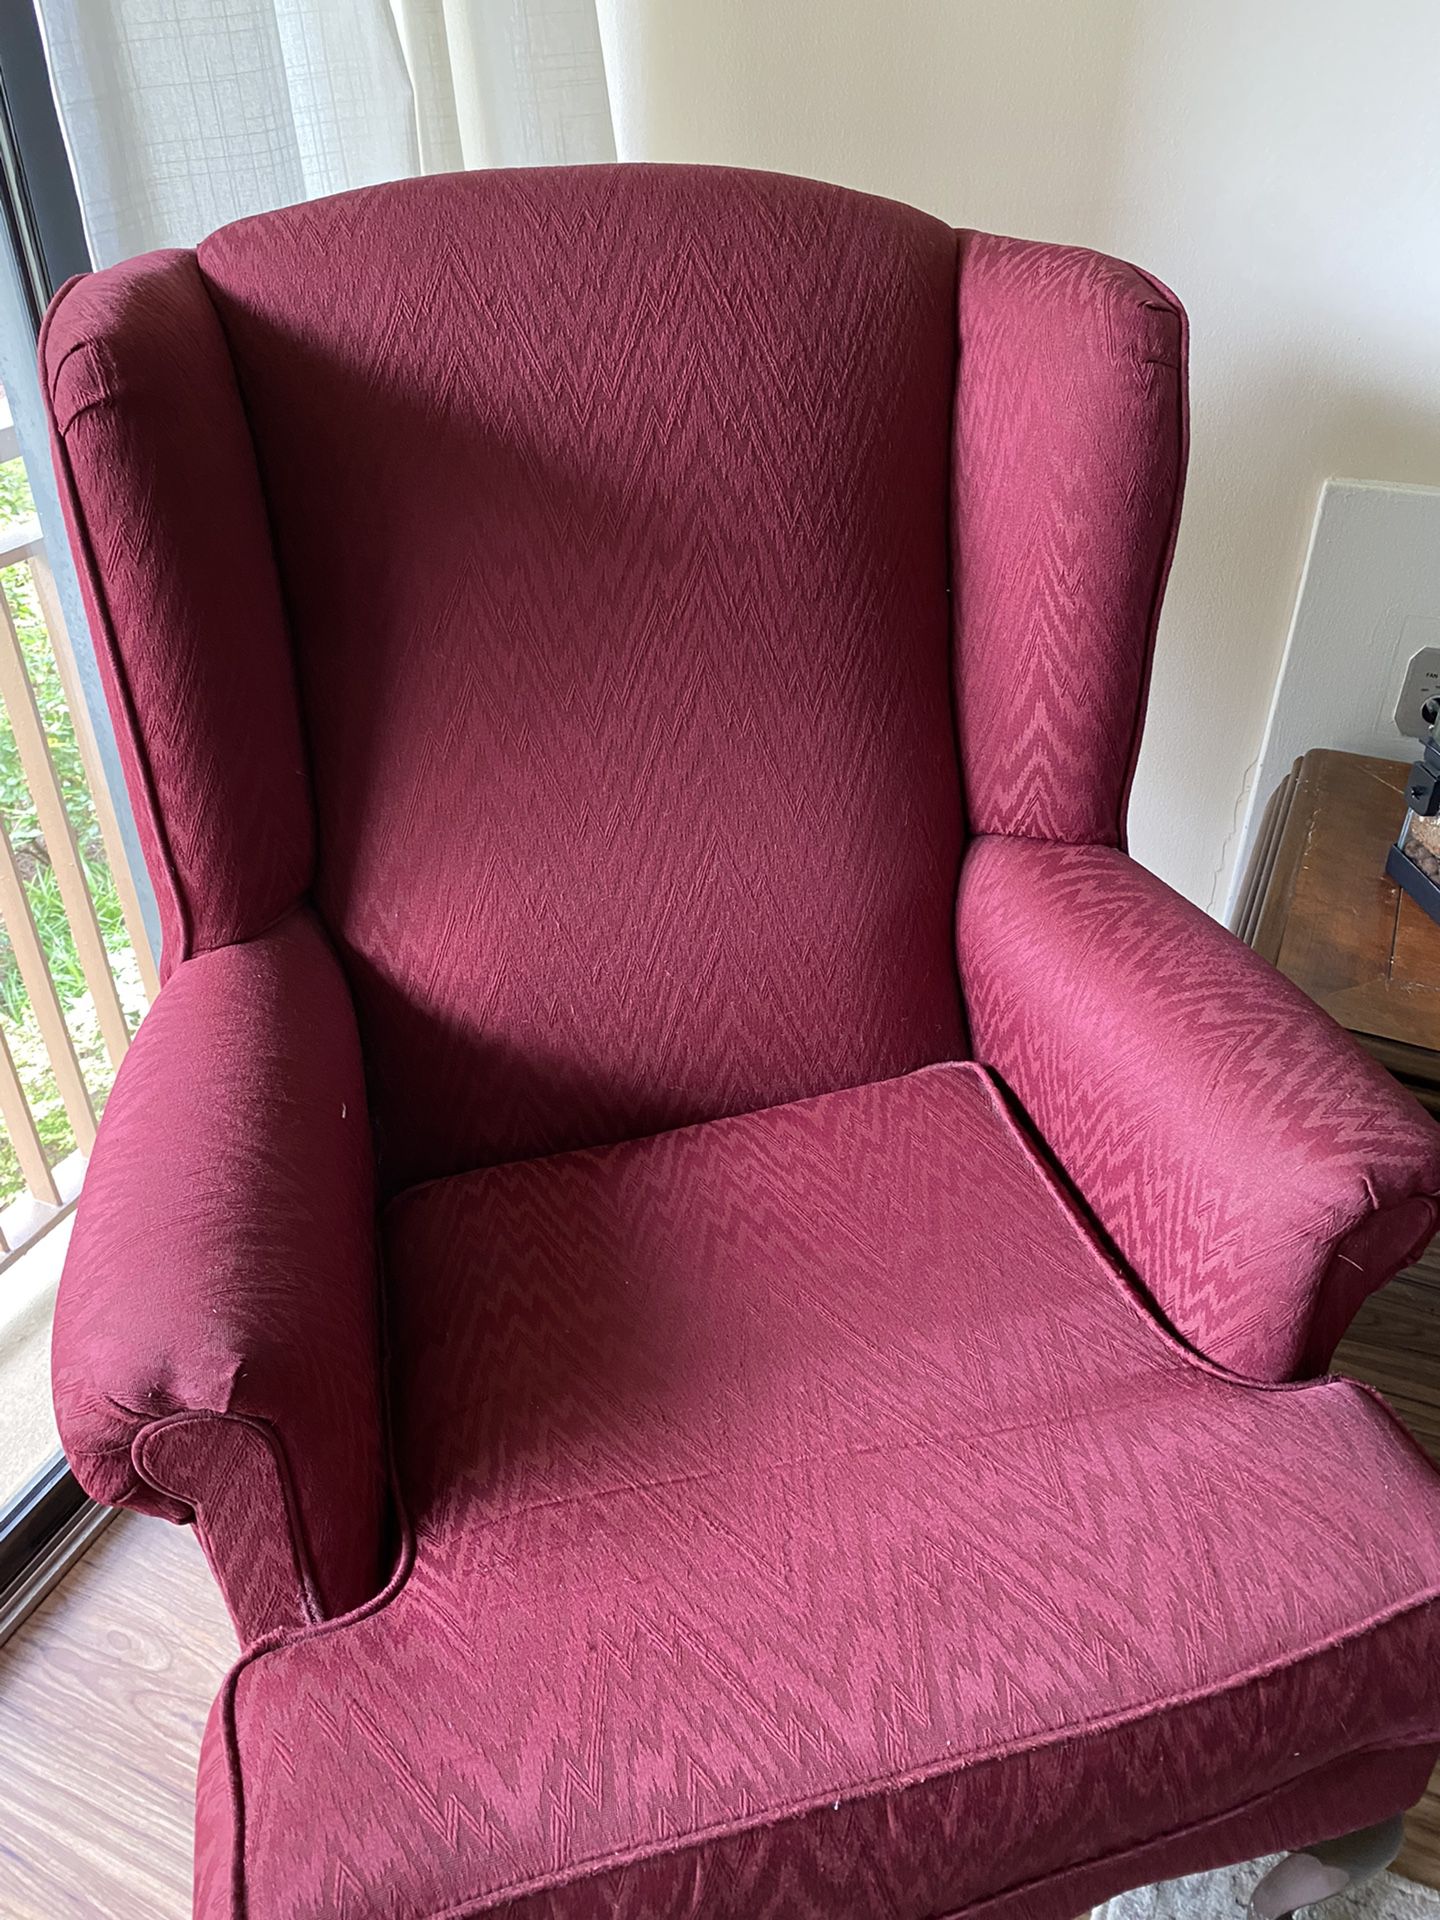 Comfy Red-Wine Armchair